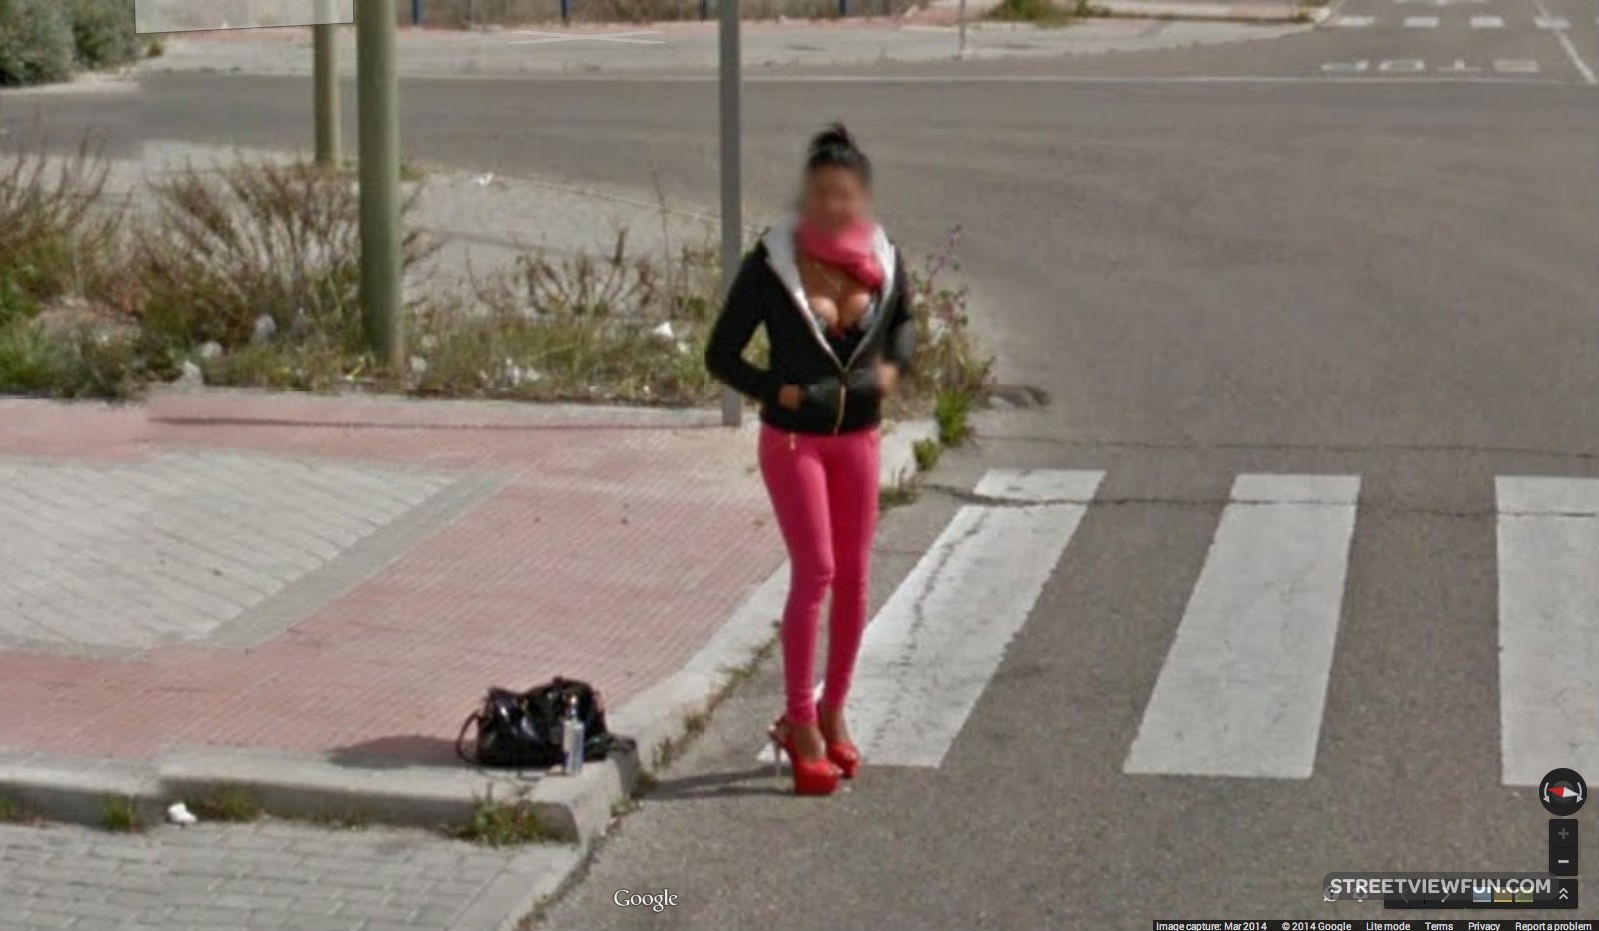 Woman Flashes Breasts On Photo In Google Maps So Now Google Is Teaching Algorithms To Detect Nudity